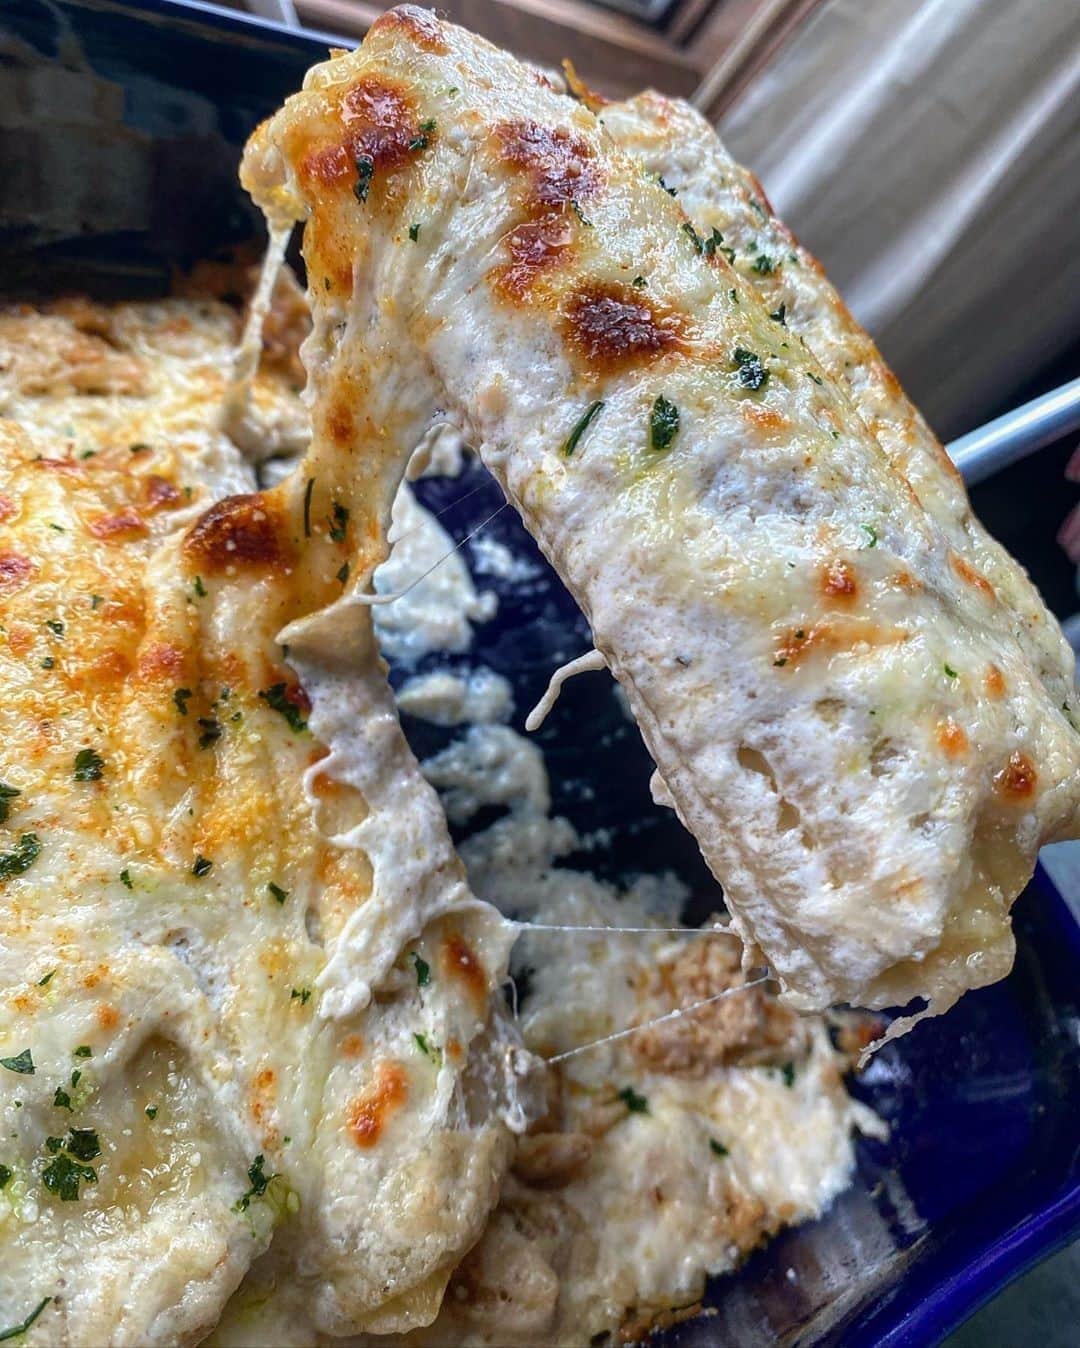 Flavorgod Seasoningsさんのインスタグラム写真 - (Flavorgod SeasoningsInstagram)「Manicotti with a twist.. Chicken Alfredo style.. with a side of homemade garlic coins 🔥🔥 by Customer @platesbykandt seasoned with #Flavorgod Italian zest and Everything Seasoning!⁠ -⁠ Add delicious flavors to your meals!⬇️⁠ Click link in the bio -> @flavorgod  www.flavorgod.com⁠ -⁠ "I took some @auntmilliesbread artisan bread and used a little glass to cut some pieces out, seasoned them with garlic powder, pepper, olive oil, and Parmesan of course. You could use this bread to creative with any meal 👌🏽"⁠ ⁠ Follow @platesbykandt and DM for this recipe⁠ ⁠ Made by: Kody⁠ Key ingredients 👇🏽⁠ • @auntmilliesbread Artisan bread⁠ • @flavorgod Italian zest & everything⁠ • @ronzonipasta manicotti⁠ • @murrayscheese fresh mozzarella and Parmesan cheeses⁠ • Scratch made Alfredo sauce⁠ • @perduechicken⁠ -⁠ Flavor God Seasonings are:⁠ ➡ZERO CALORIES PER SERVING⁠ ➡MADE FRESH⁠ ➡MADE LOCALLY IN US⁠ ➡FREE GIFTS AT CHECKOUT⁠ ➡GLUTEN FREE⁠ ➡#PALEO & #KETO FRIENDLY⁠ -⁠ #food #foodie #flavorgod #seasonings #glutenfree #mealprep #seasonings #breakfast #lunch #dinner #yummy #delicious #foodporn」10月15日 8時01分 - flavorgod